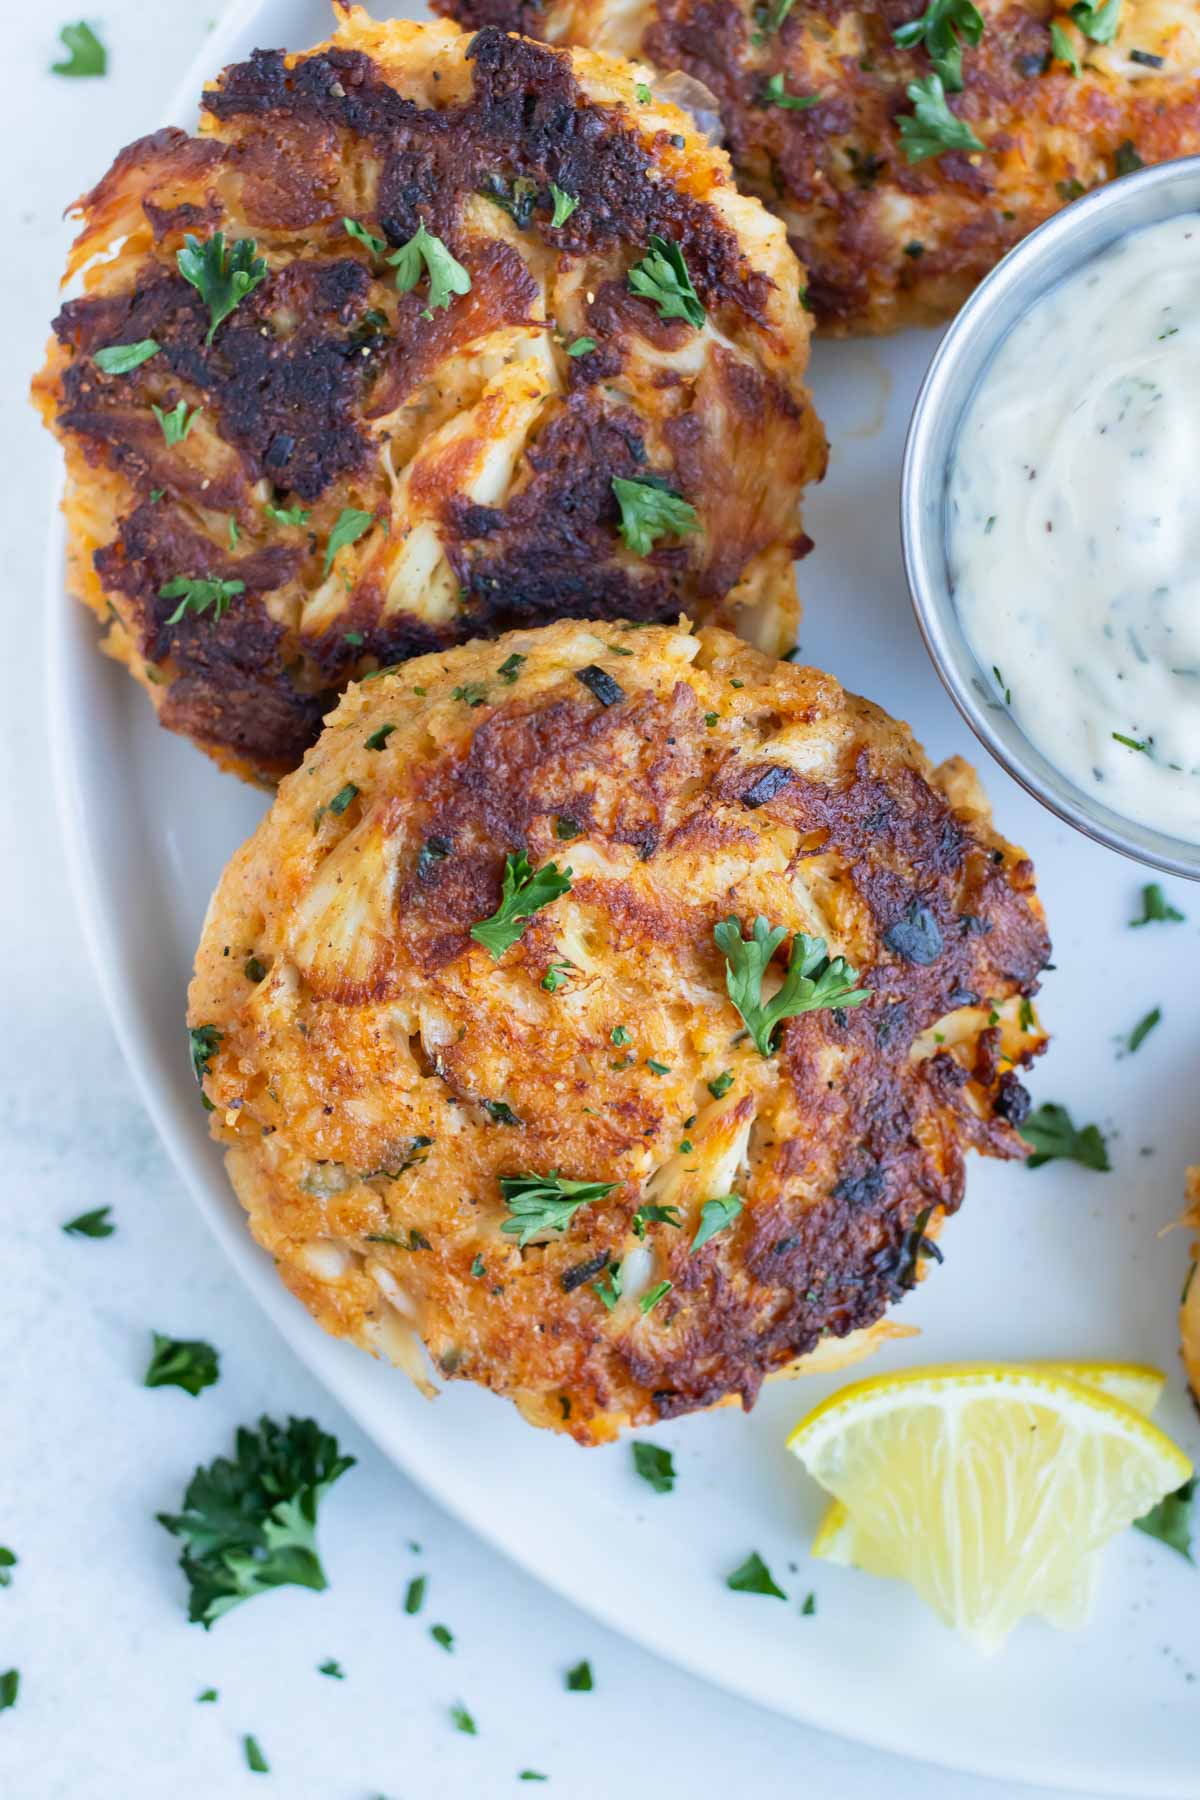 Maryland crab cakes are served for a seafood appetizer.